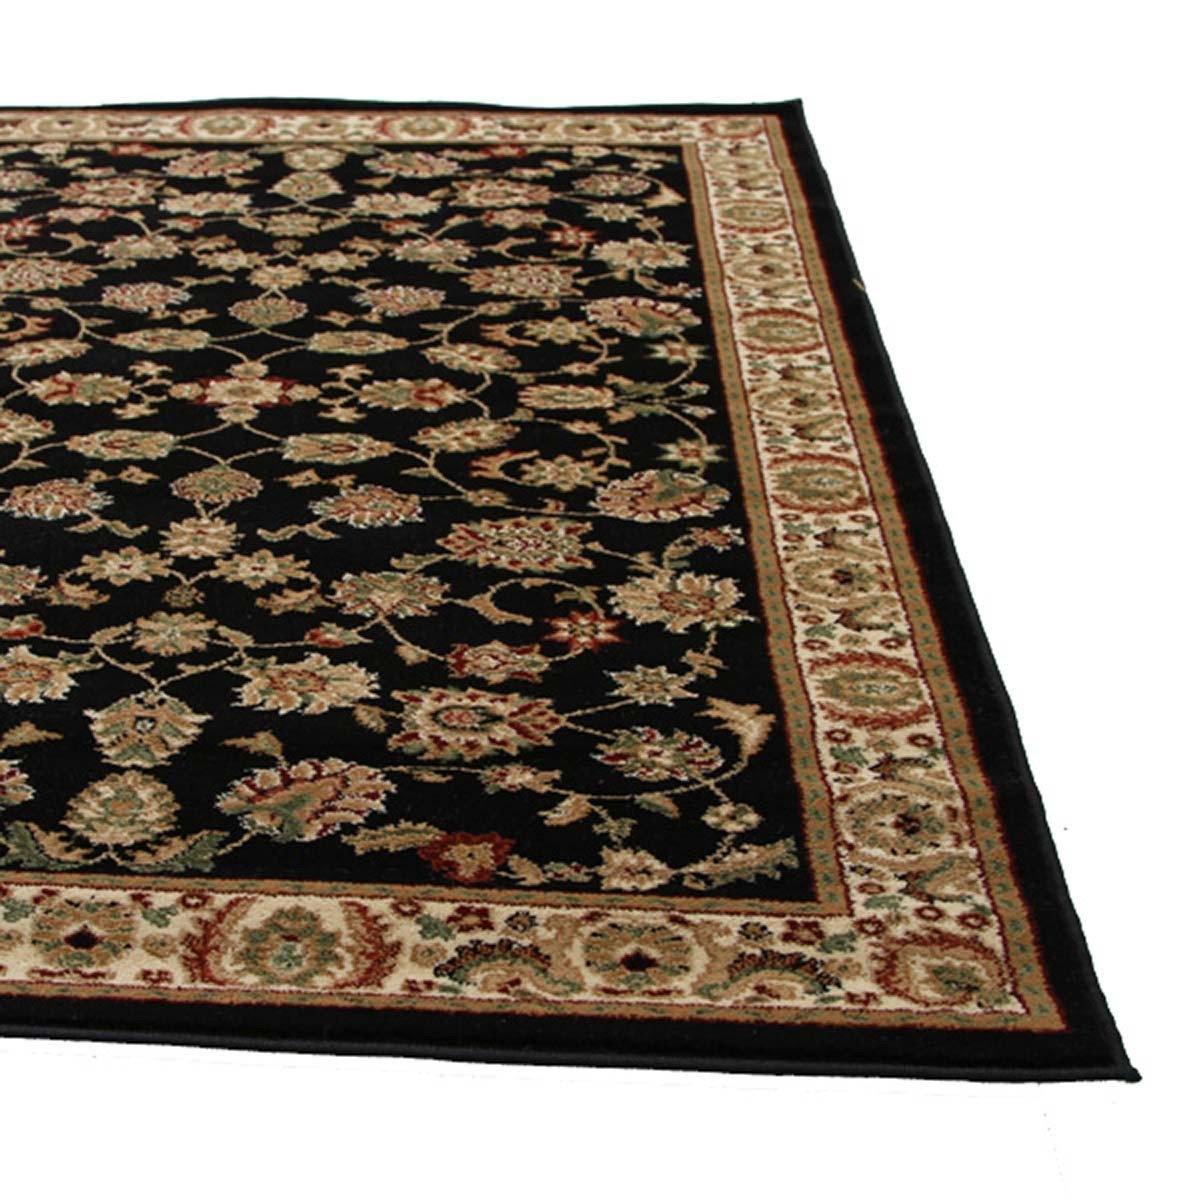 Istanbul Traditional Floral Pattern Runner Rug Black - Cozy Rugs Australia